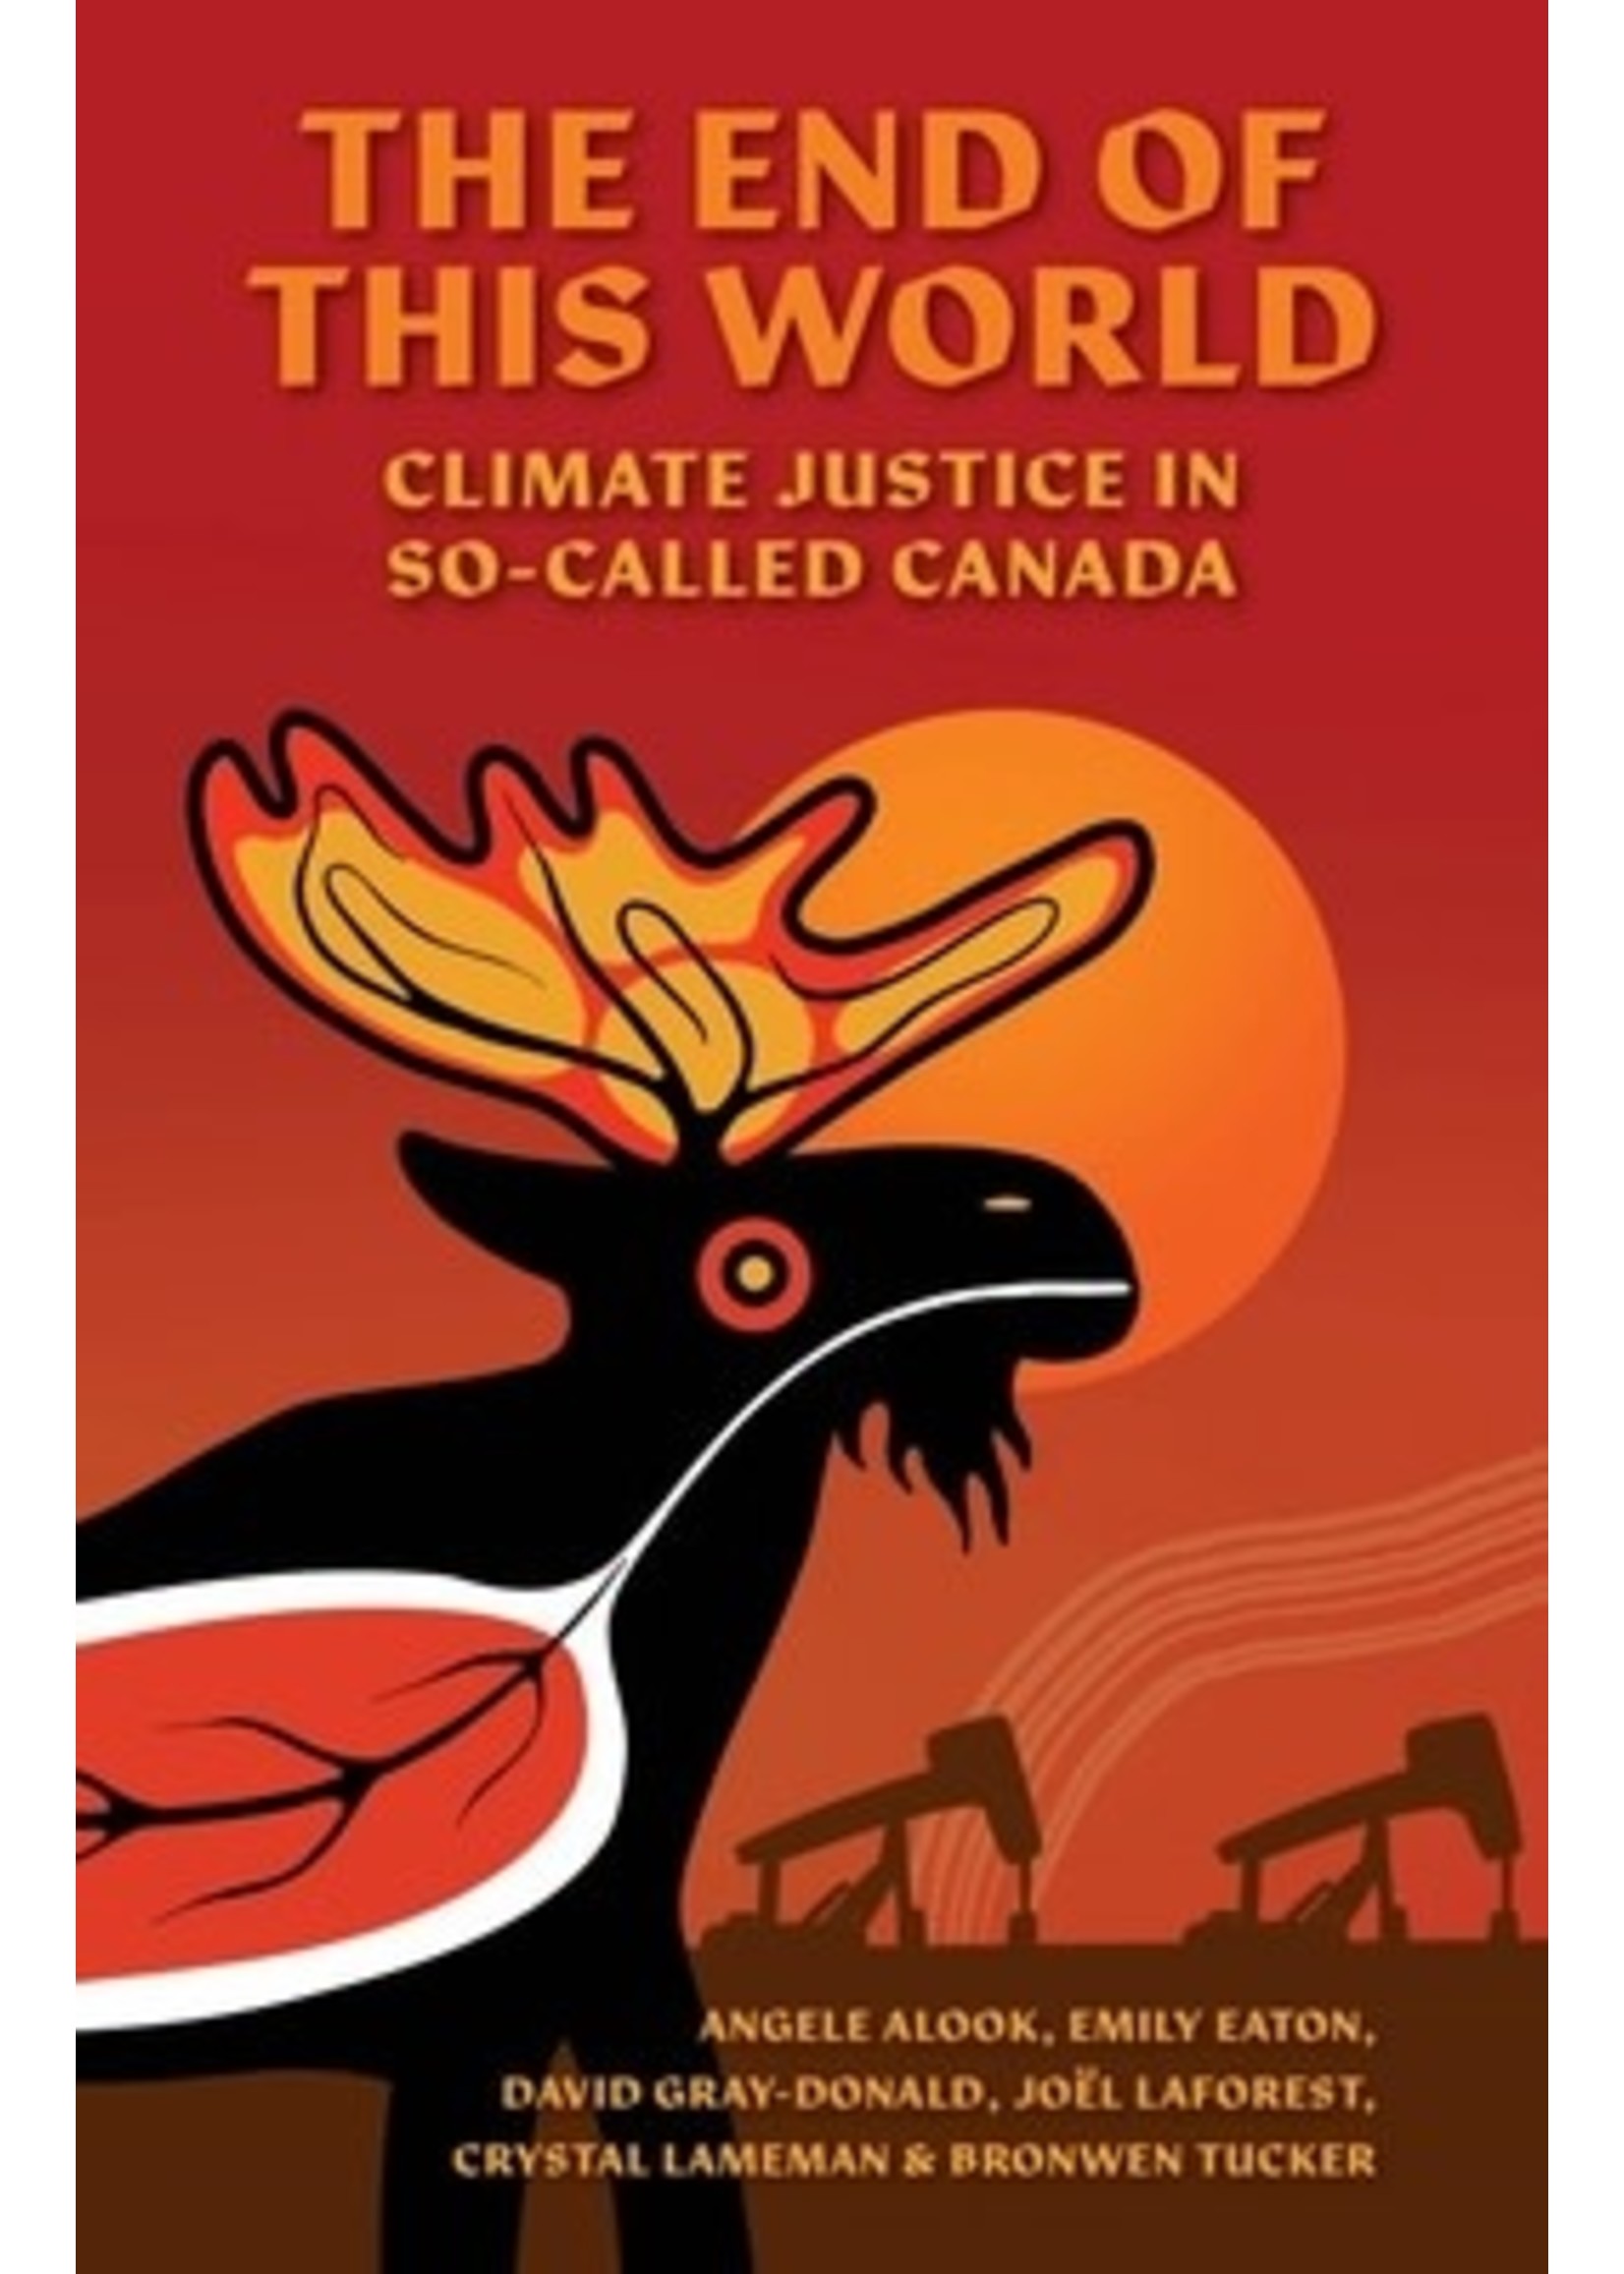 The End of This World: Climate Justice in So-Called Canada by Various Authors